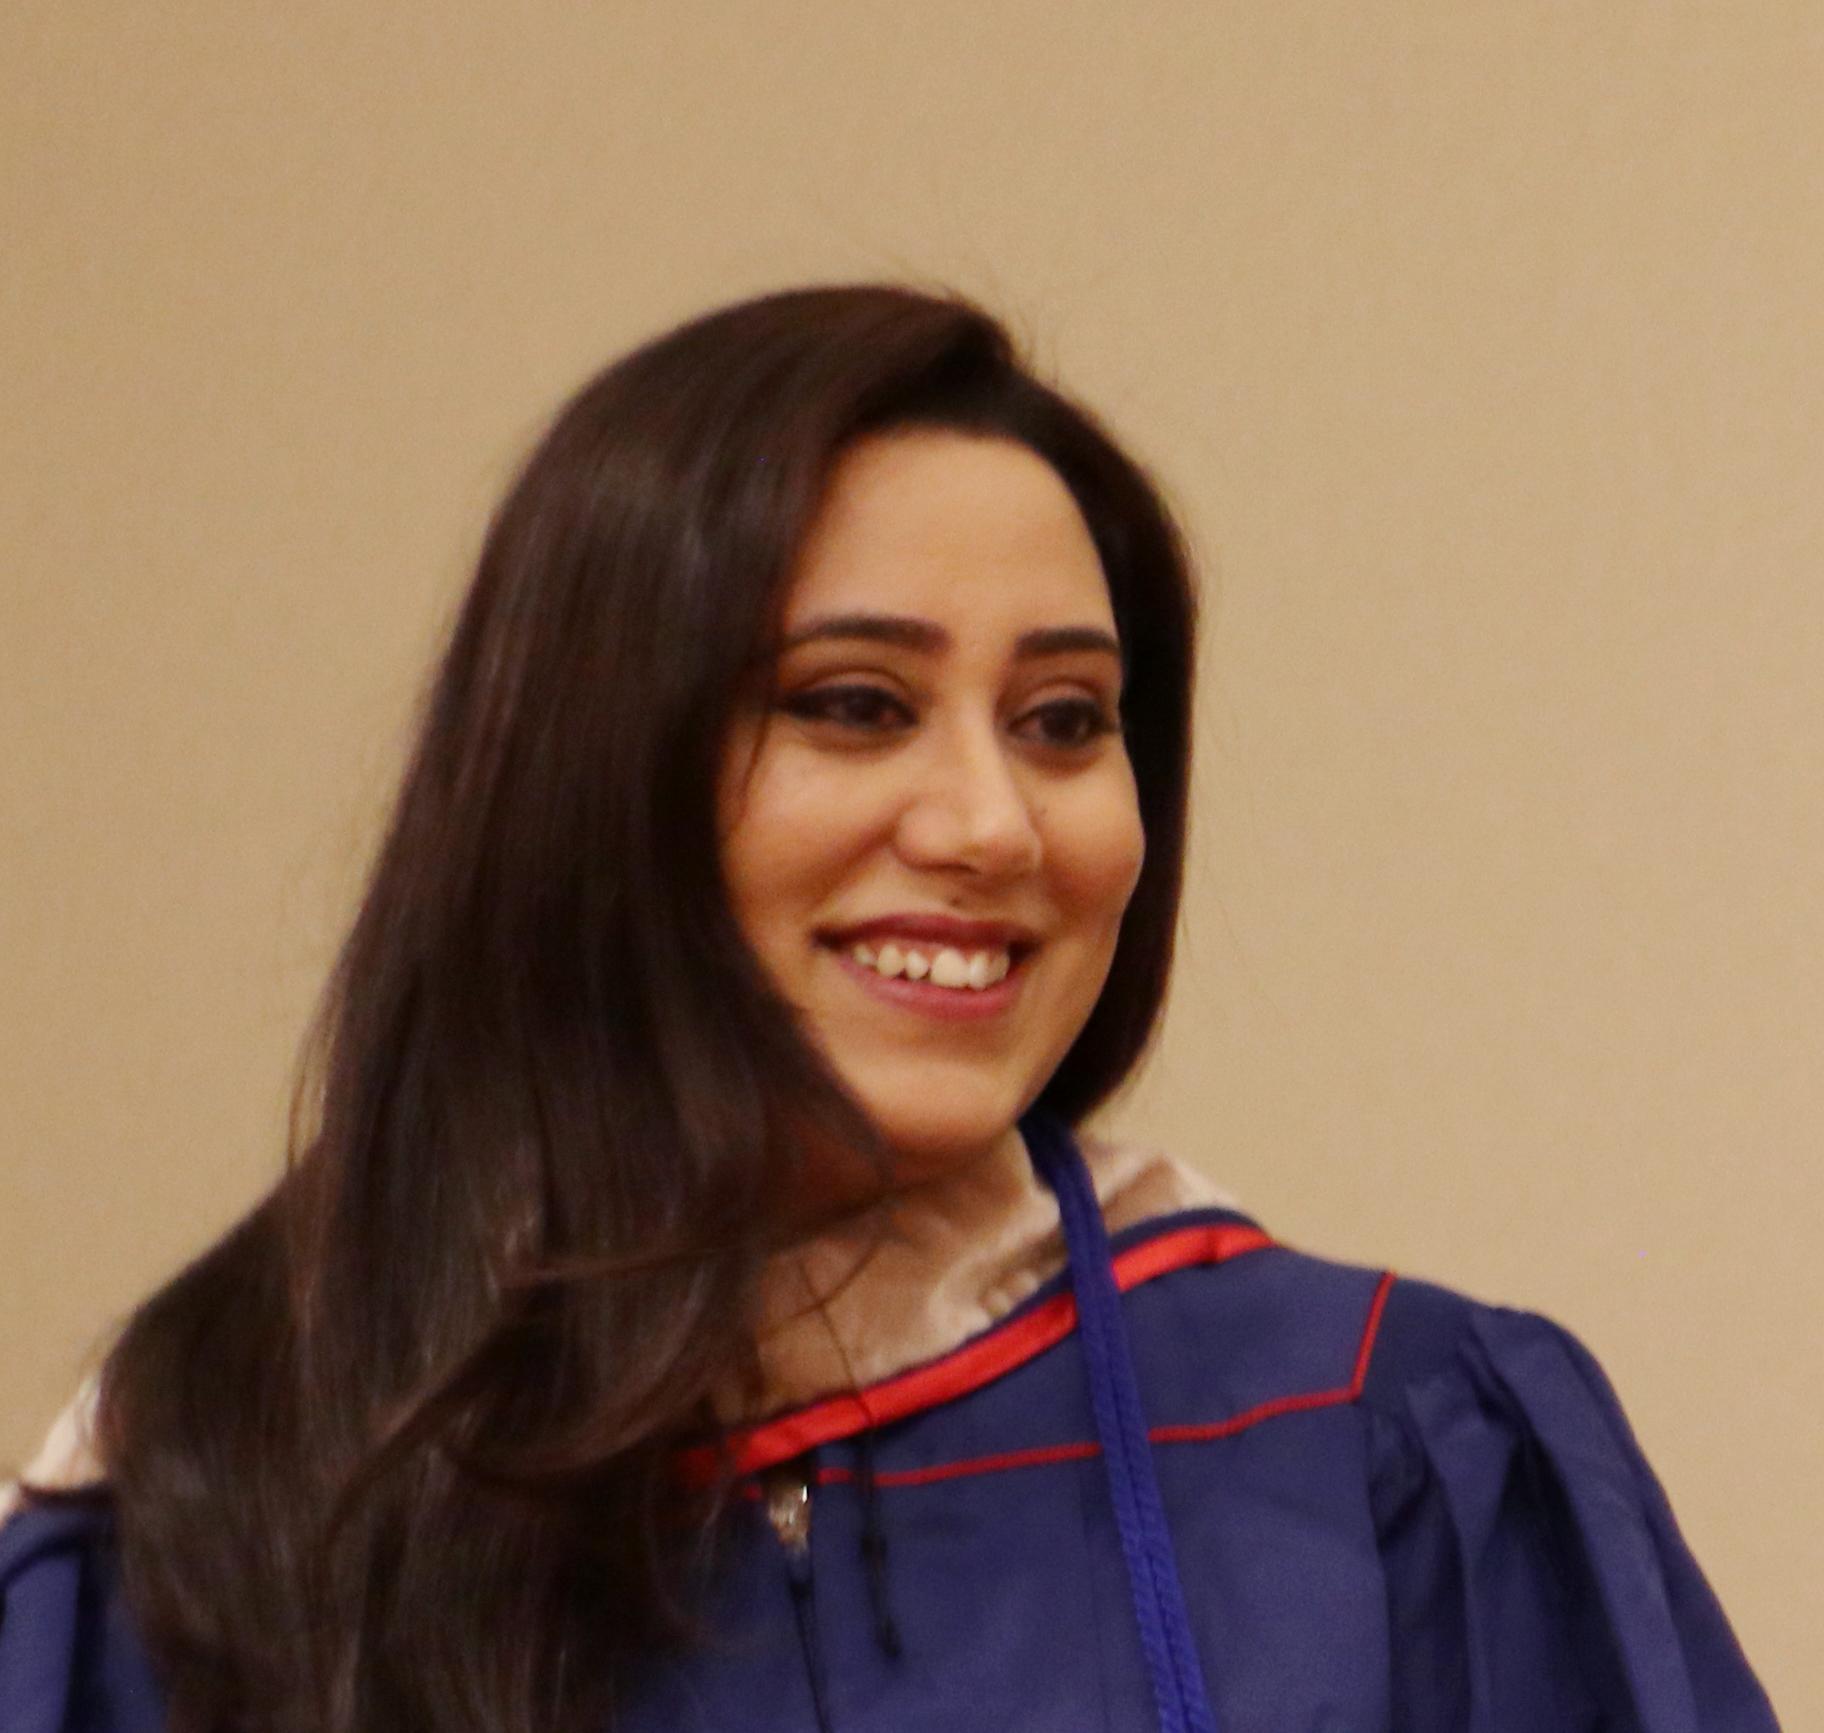 A portrait of Swati Suri during the 2018 MBA Hooding Ceremony.